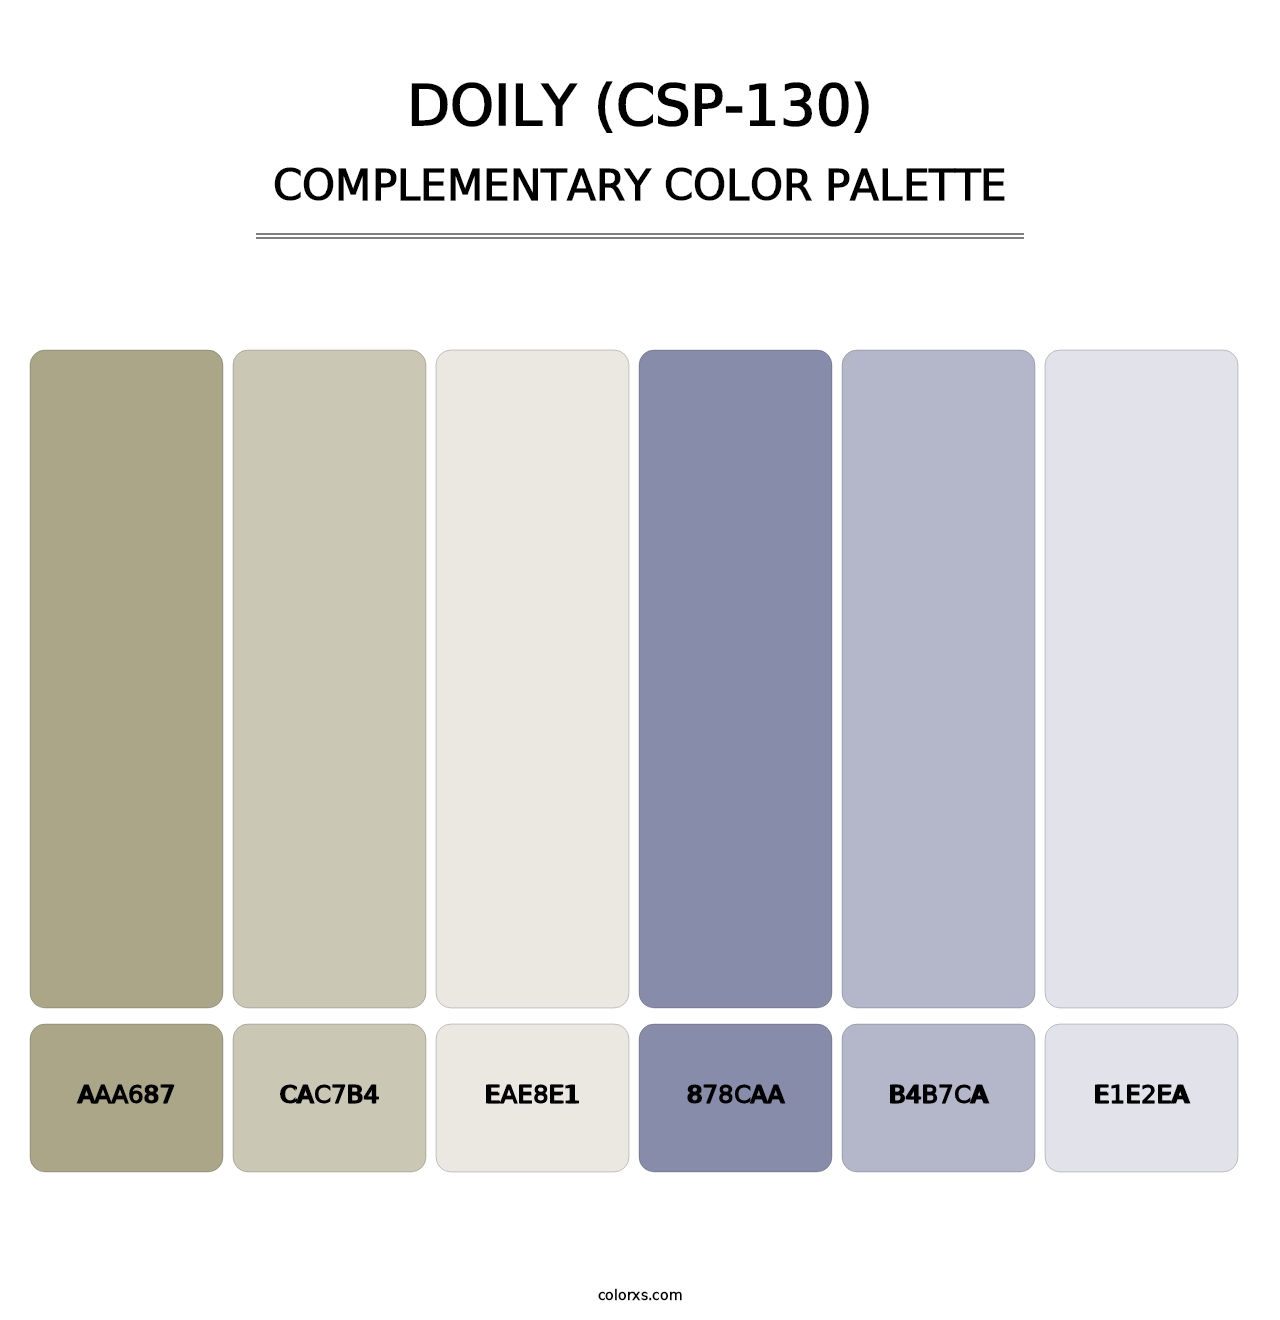 Doily (CSP-130) - Complementary Color Palette